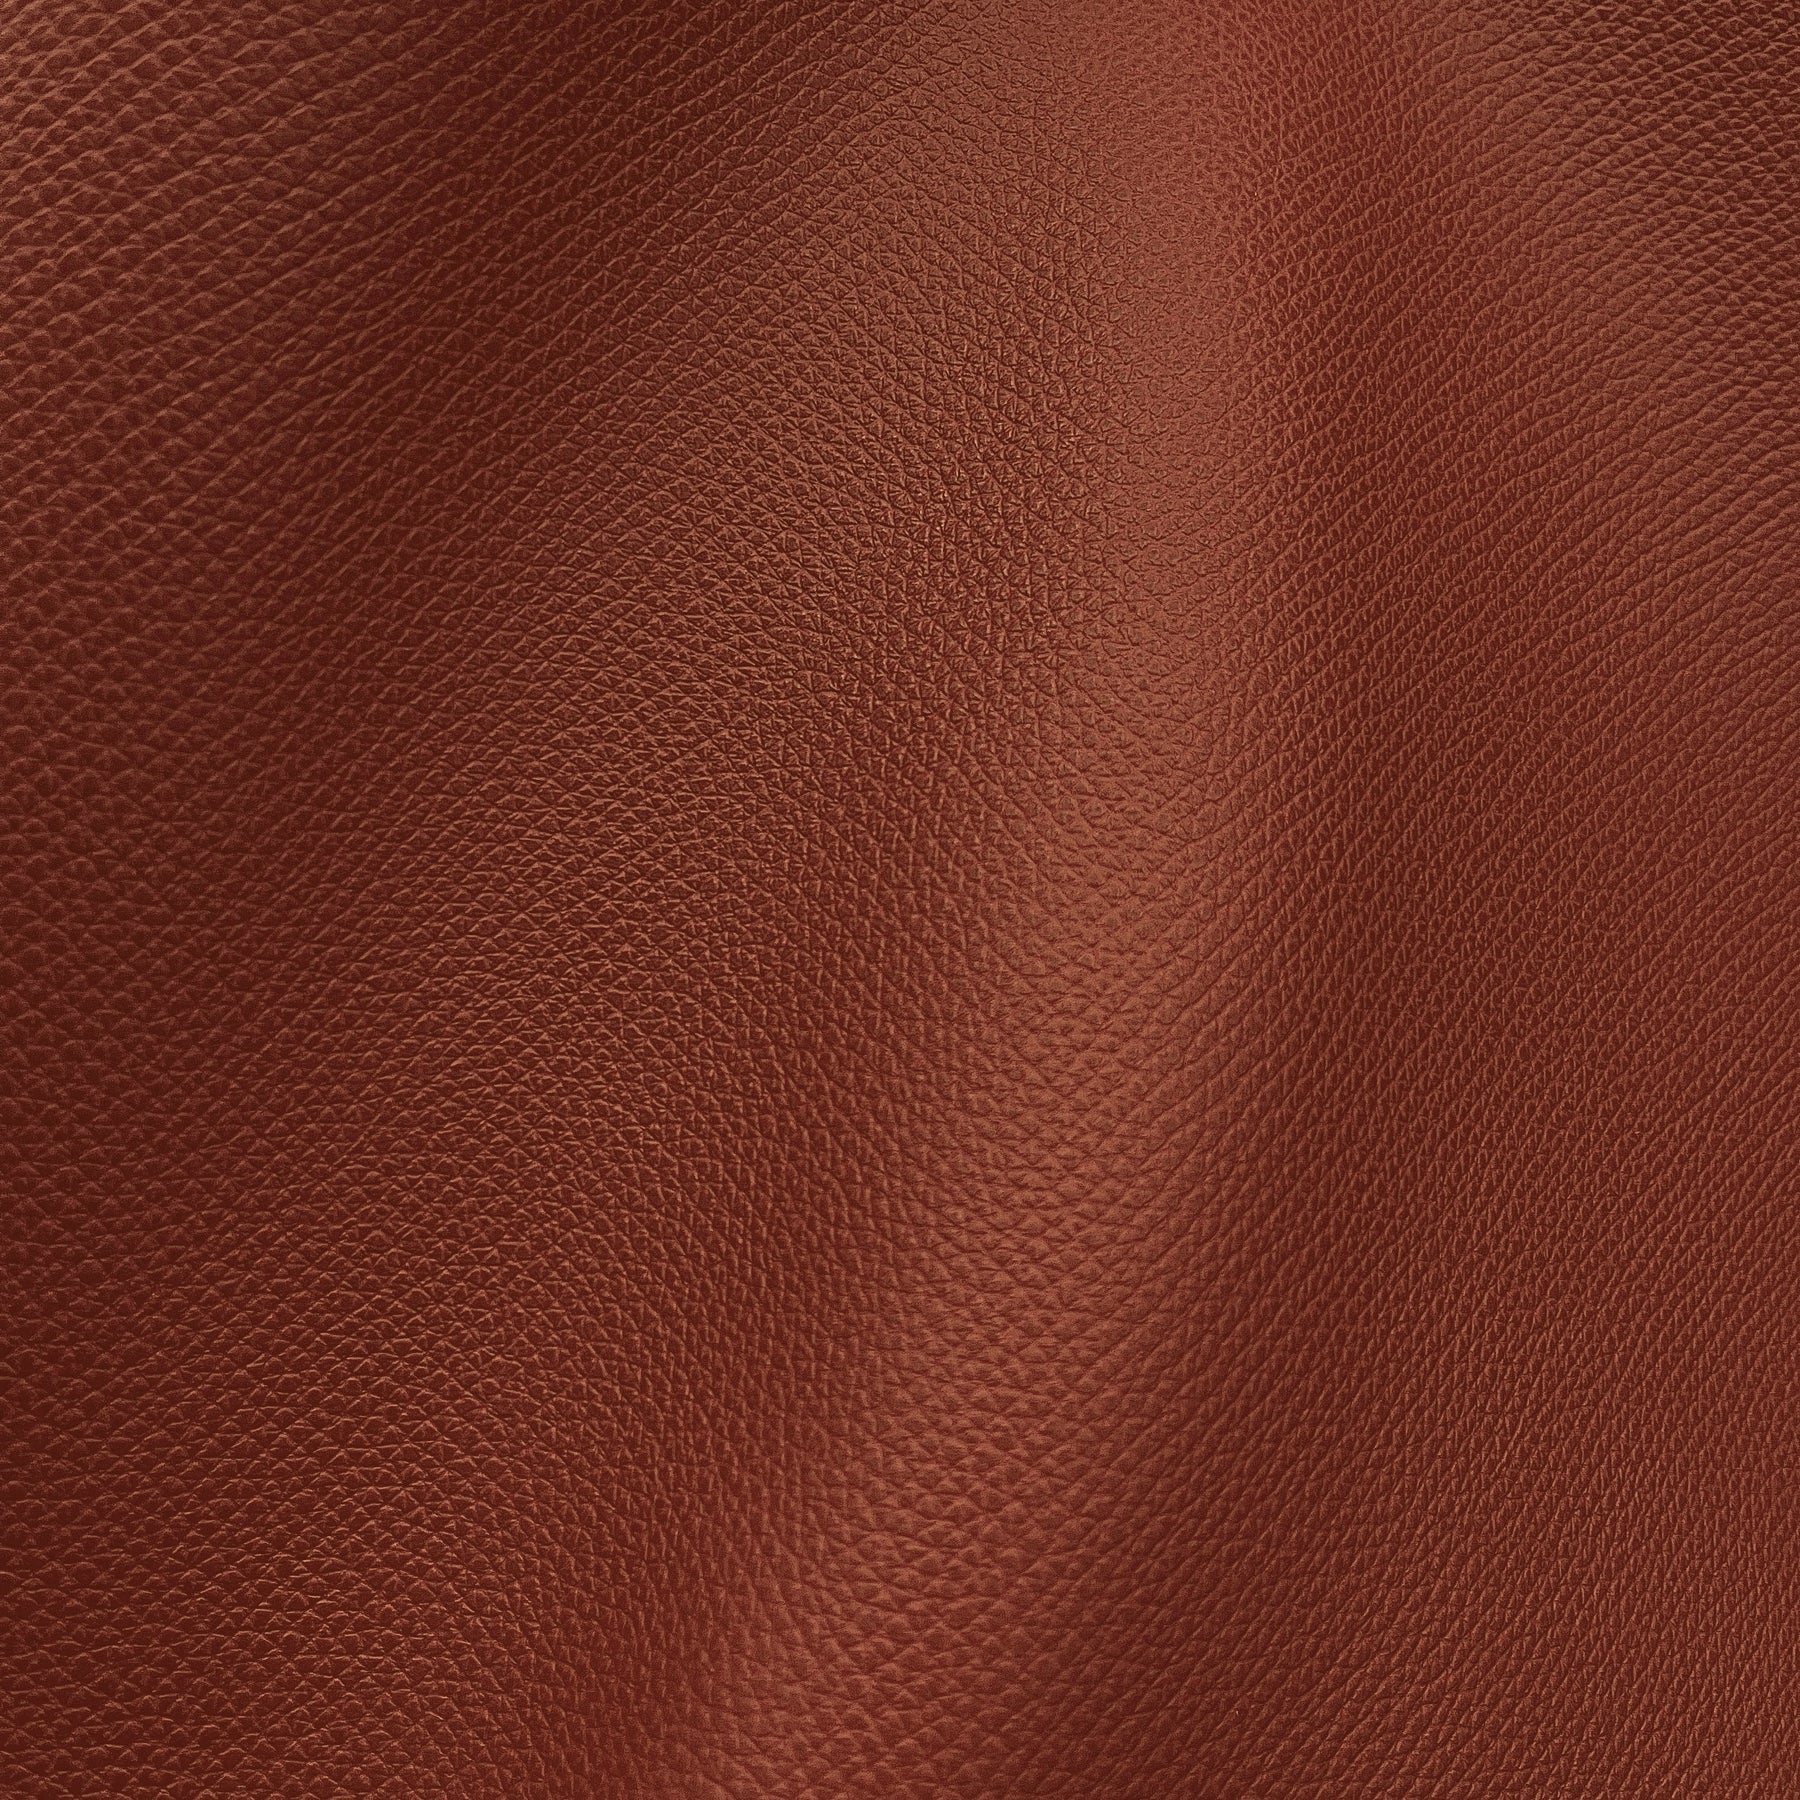 Burnt Orange Vegan Leather Fabric for Upholstery Faux Leather Fabric in Cow  Skin Pattern Matte Finish -  Denmark